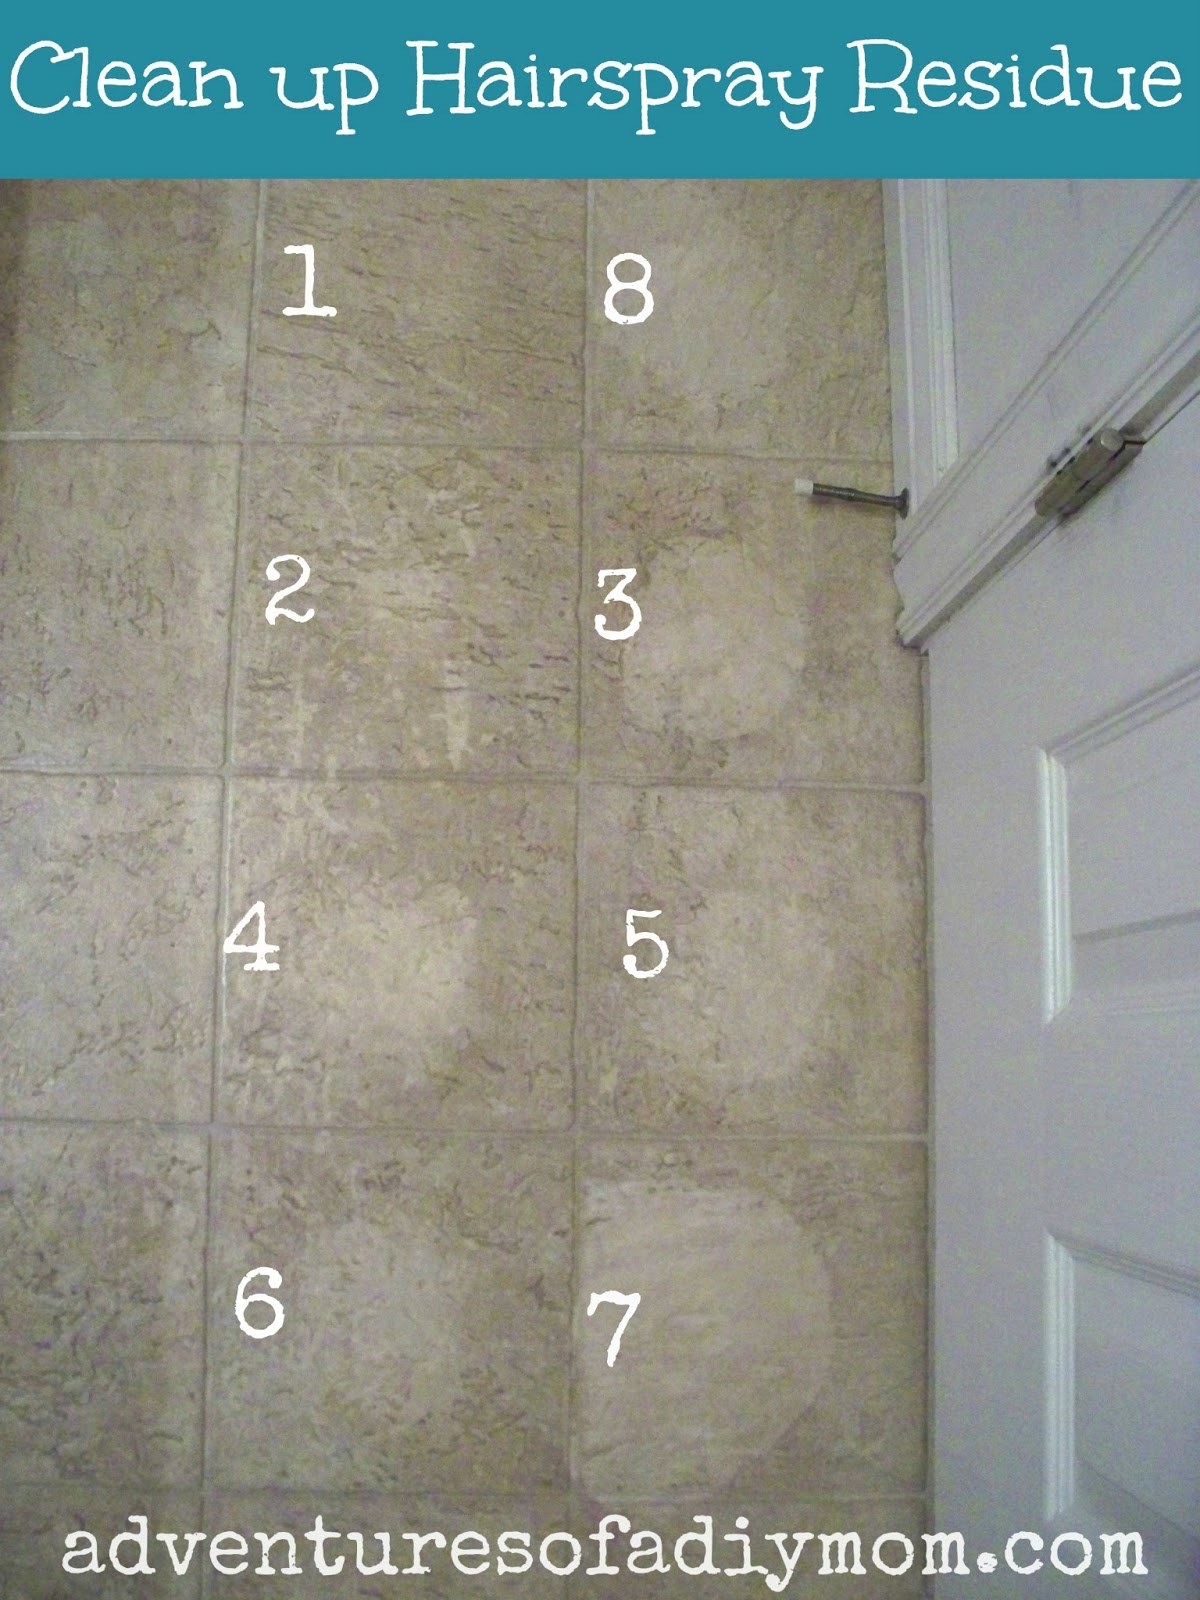 blogger&#x27;s tile bathroom floor, testing one cleaner in each of seven tiles. one tile is significantly cleaner than the rest